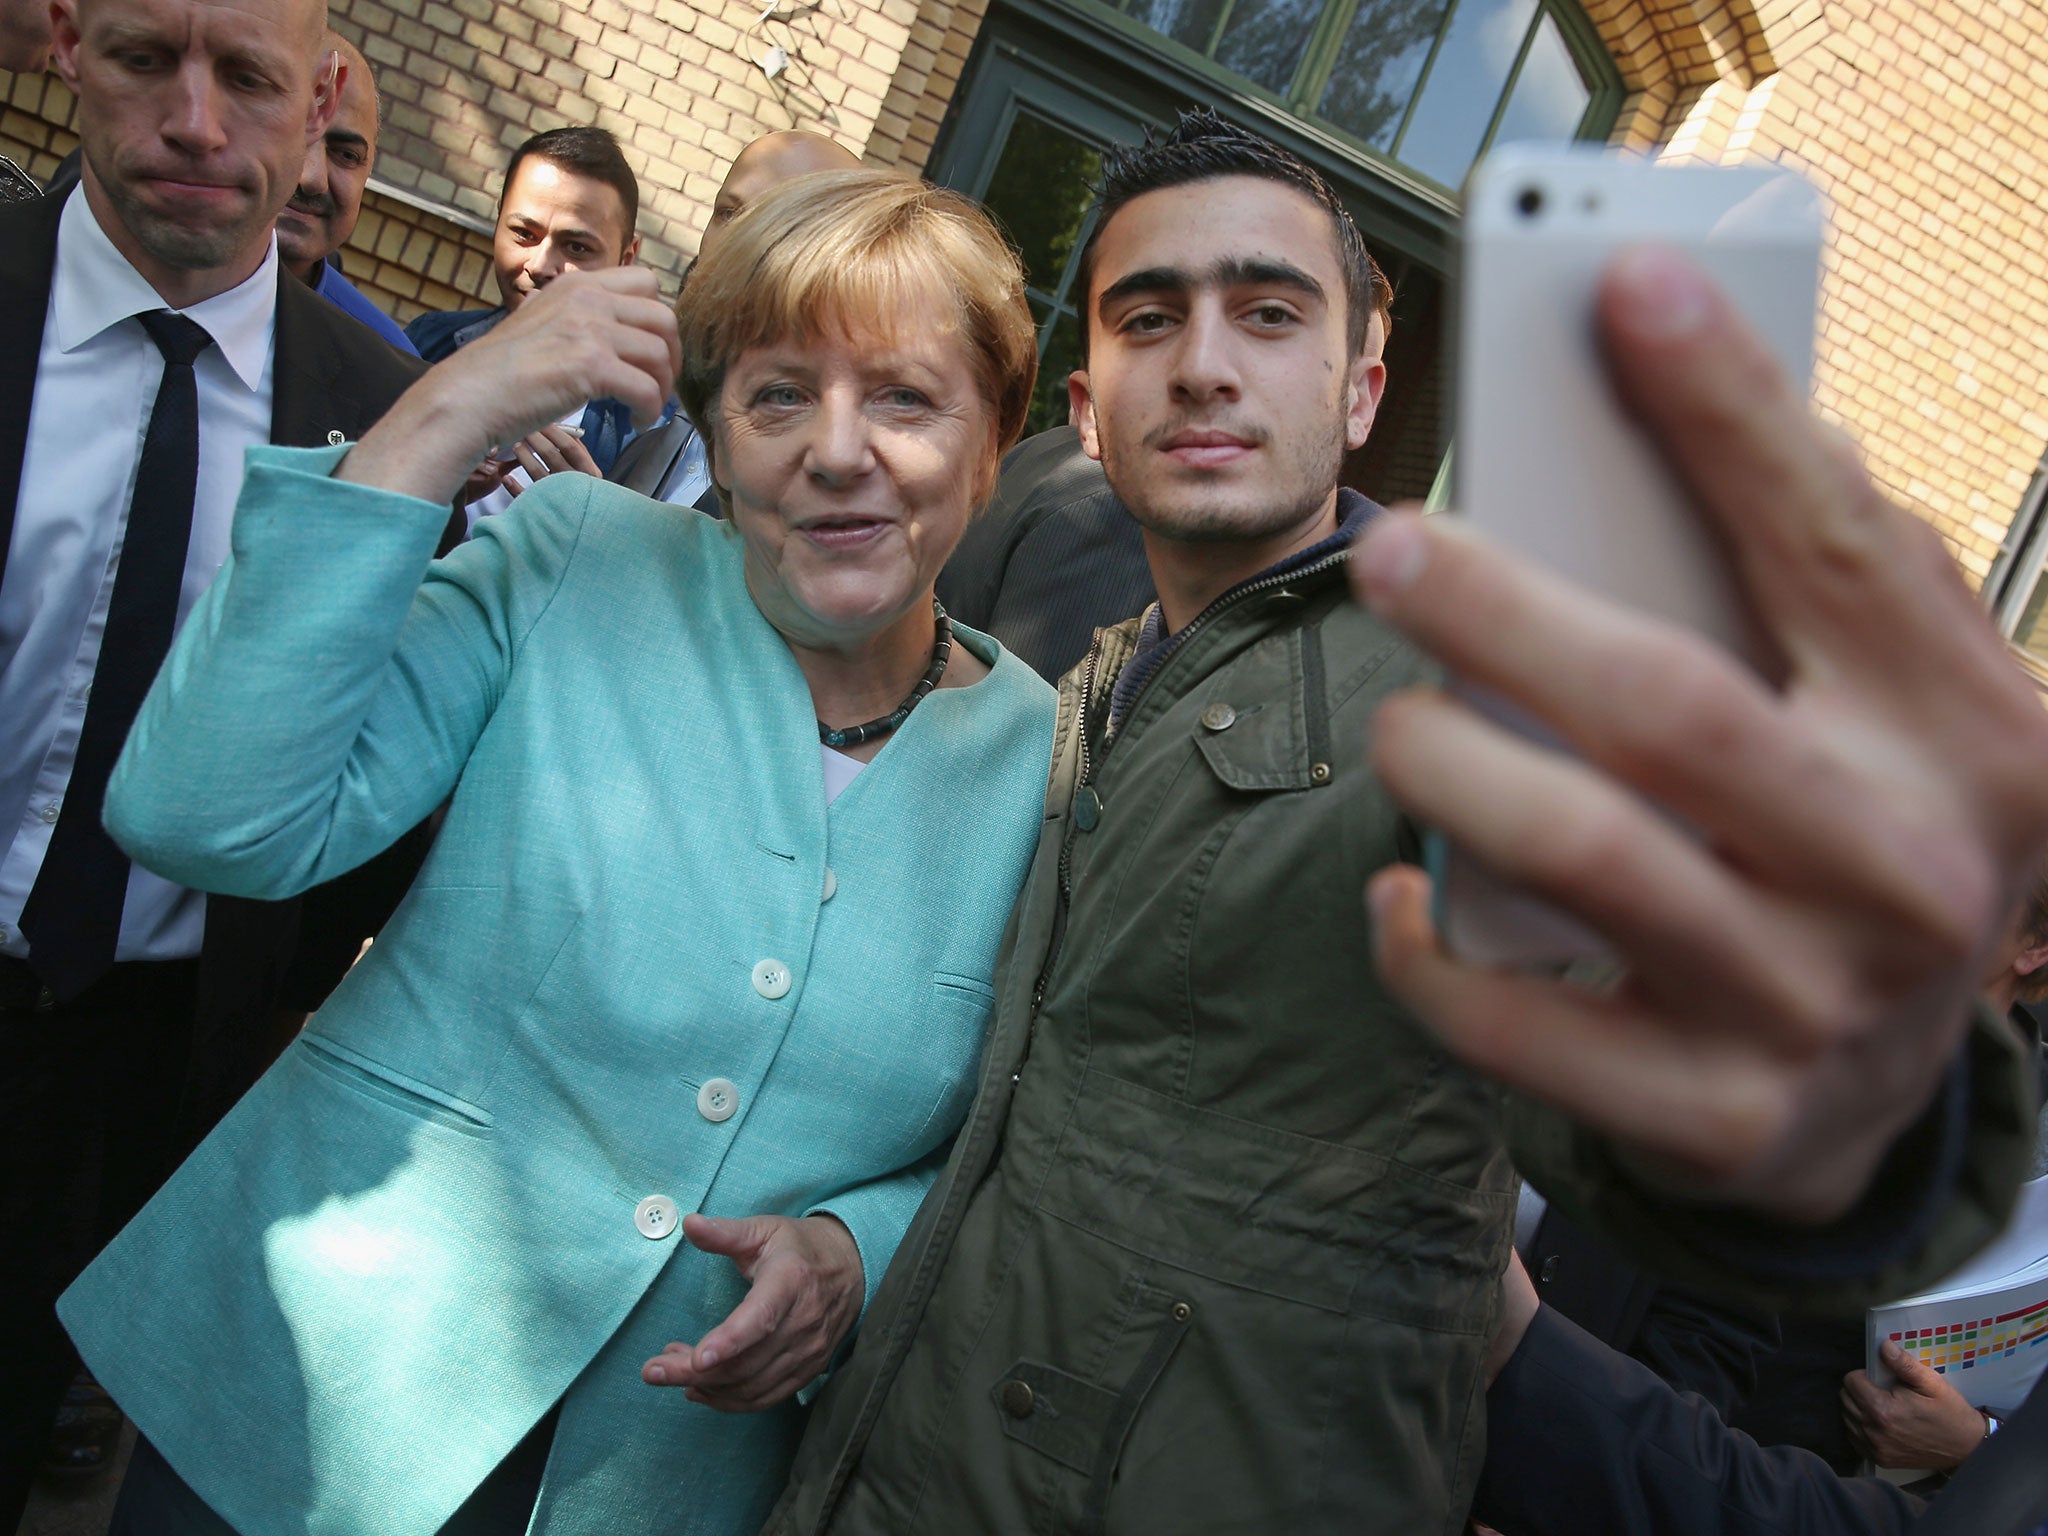 A photo of Anas Modamani taking a selfie with Angela Merkel went viral after it was used by news organisations around the world